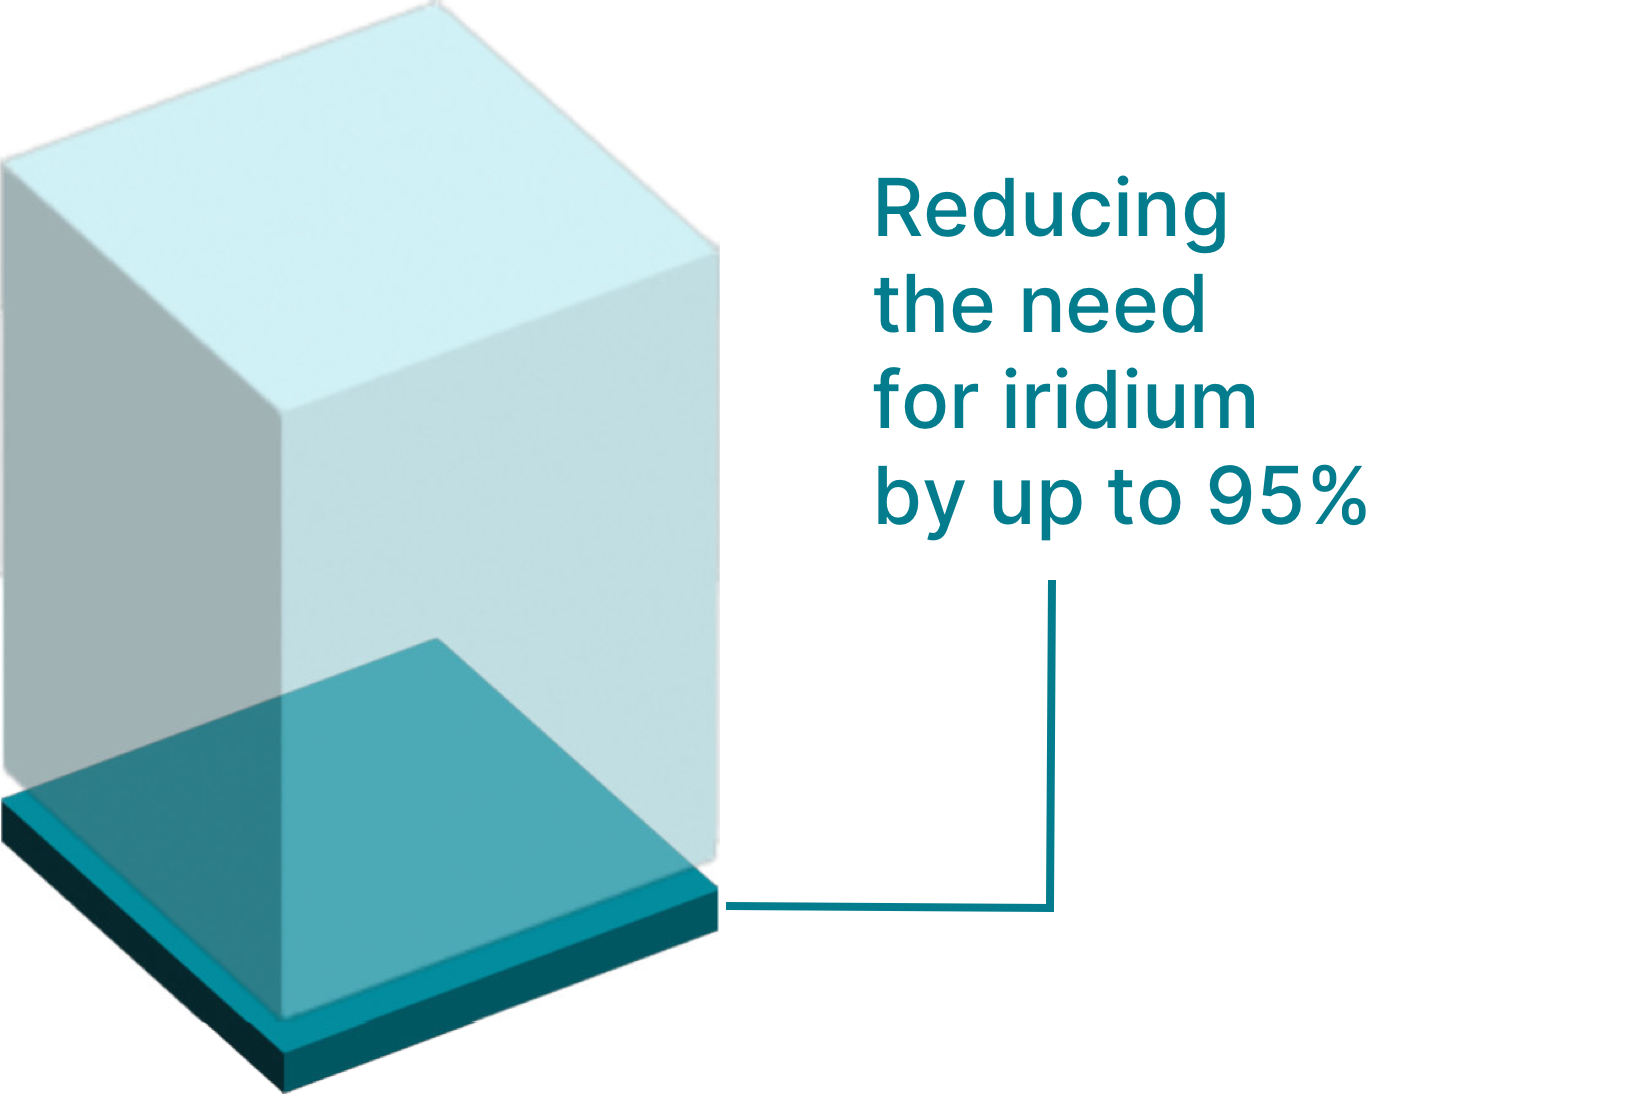 Illustration of how Smoltek's technology reduces the need for iridium by up to 95%.